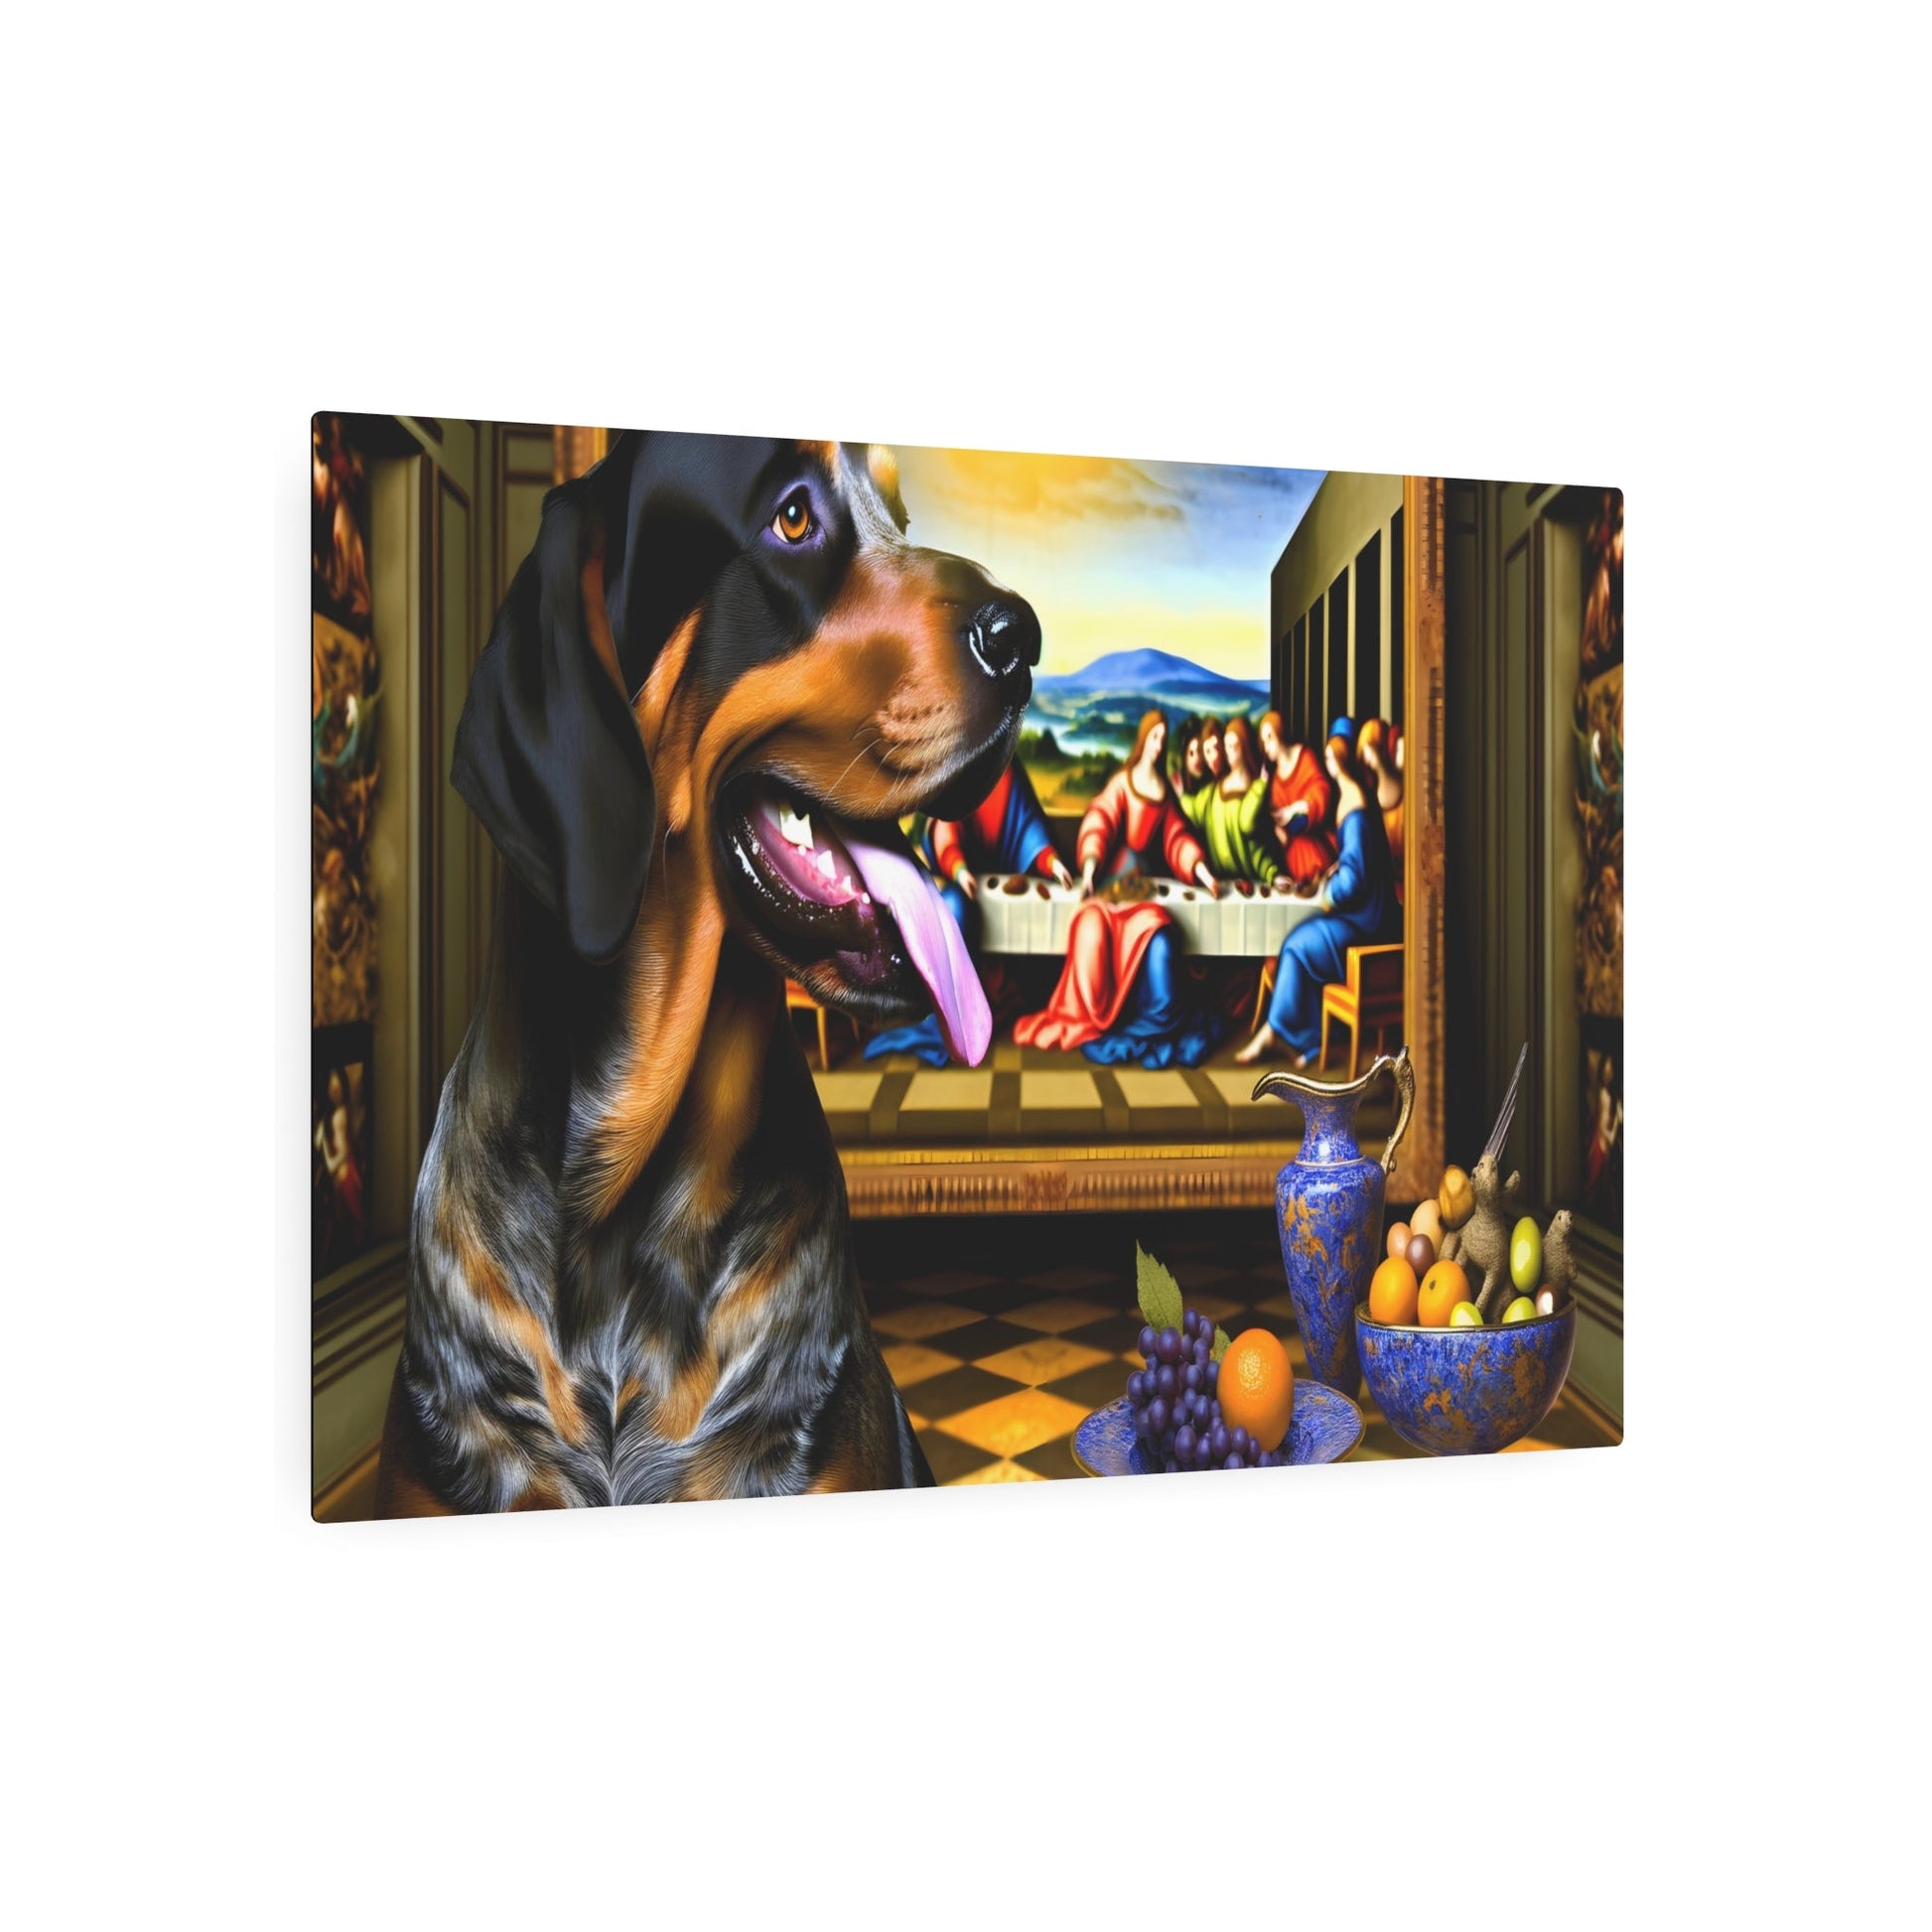 Metal Poster Art | "Majestic Renaissance-Style Noble Hunting Dog Painting - Detailed Western Art Styles Masterpiece with Rich Colors and Dramatic Lighting" - Metal Poster Art 36″ x 24″ (Horizontal) 0.12''